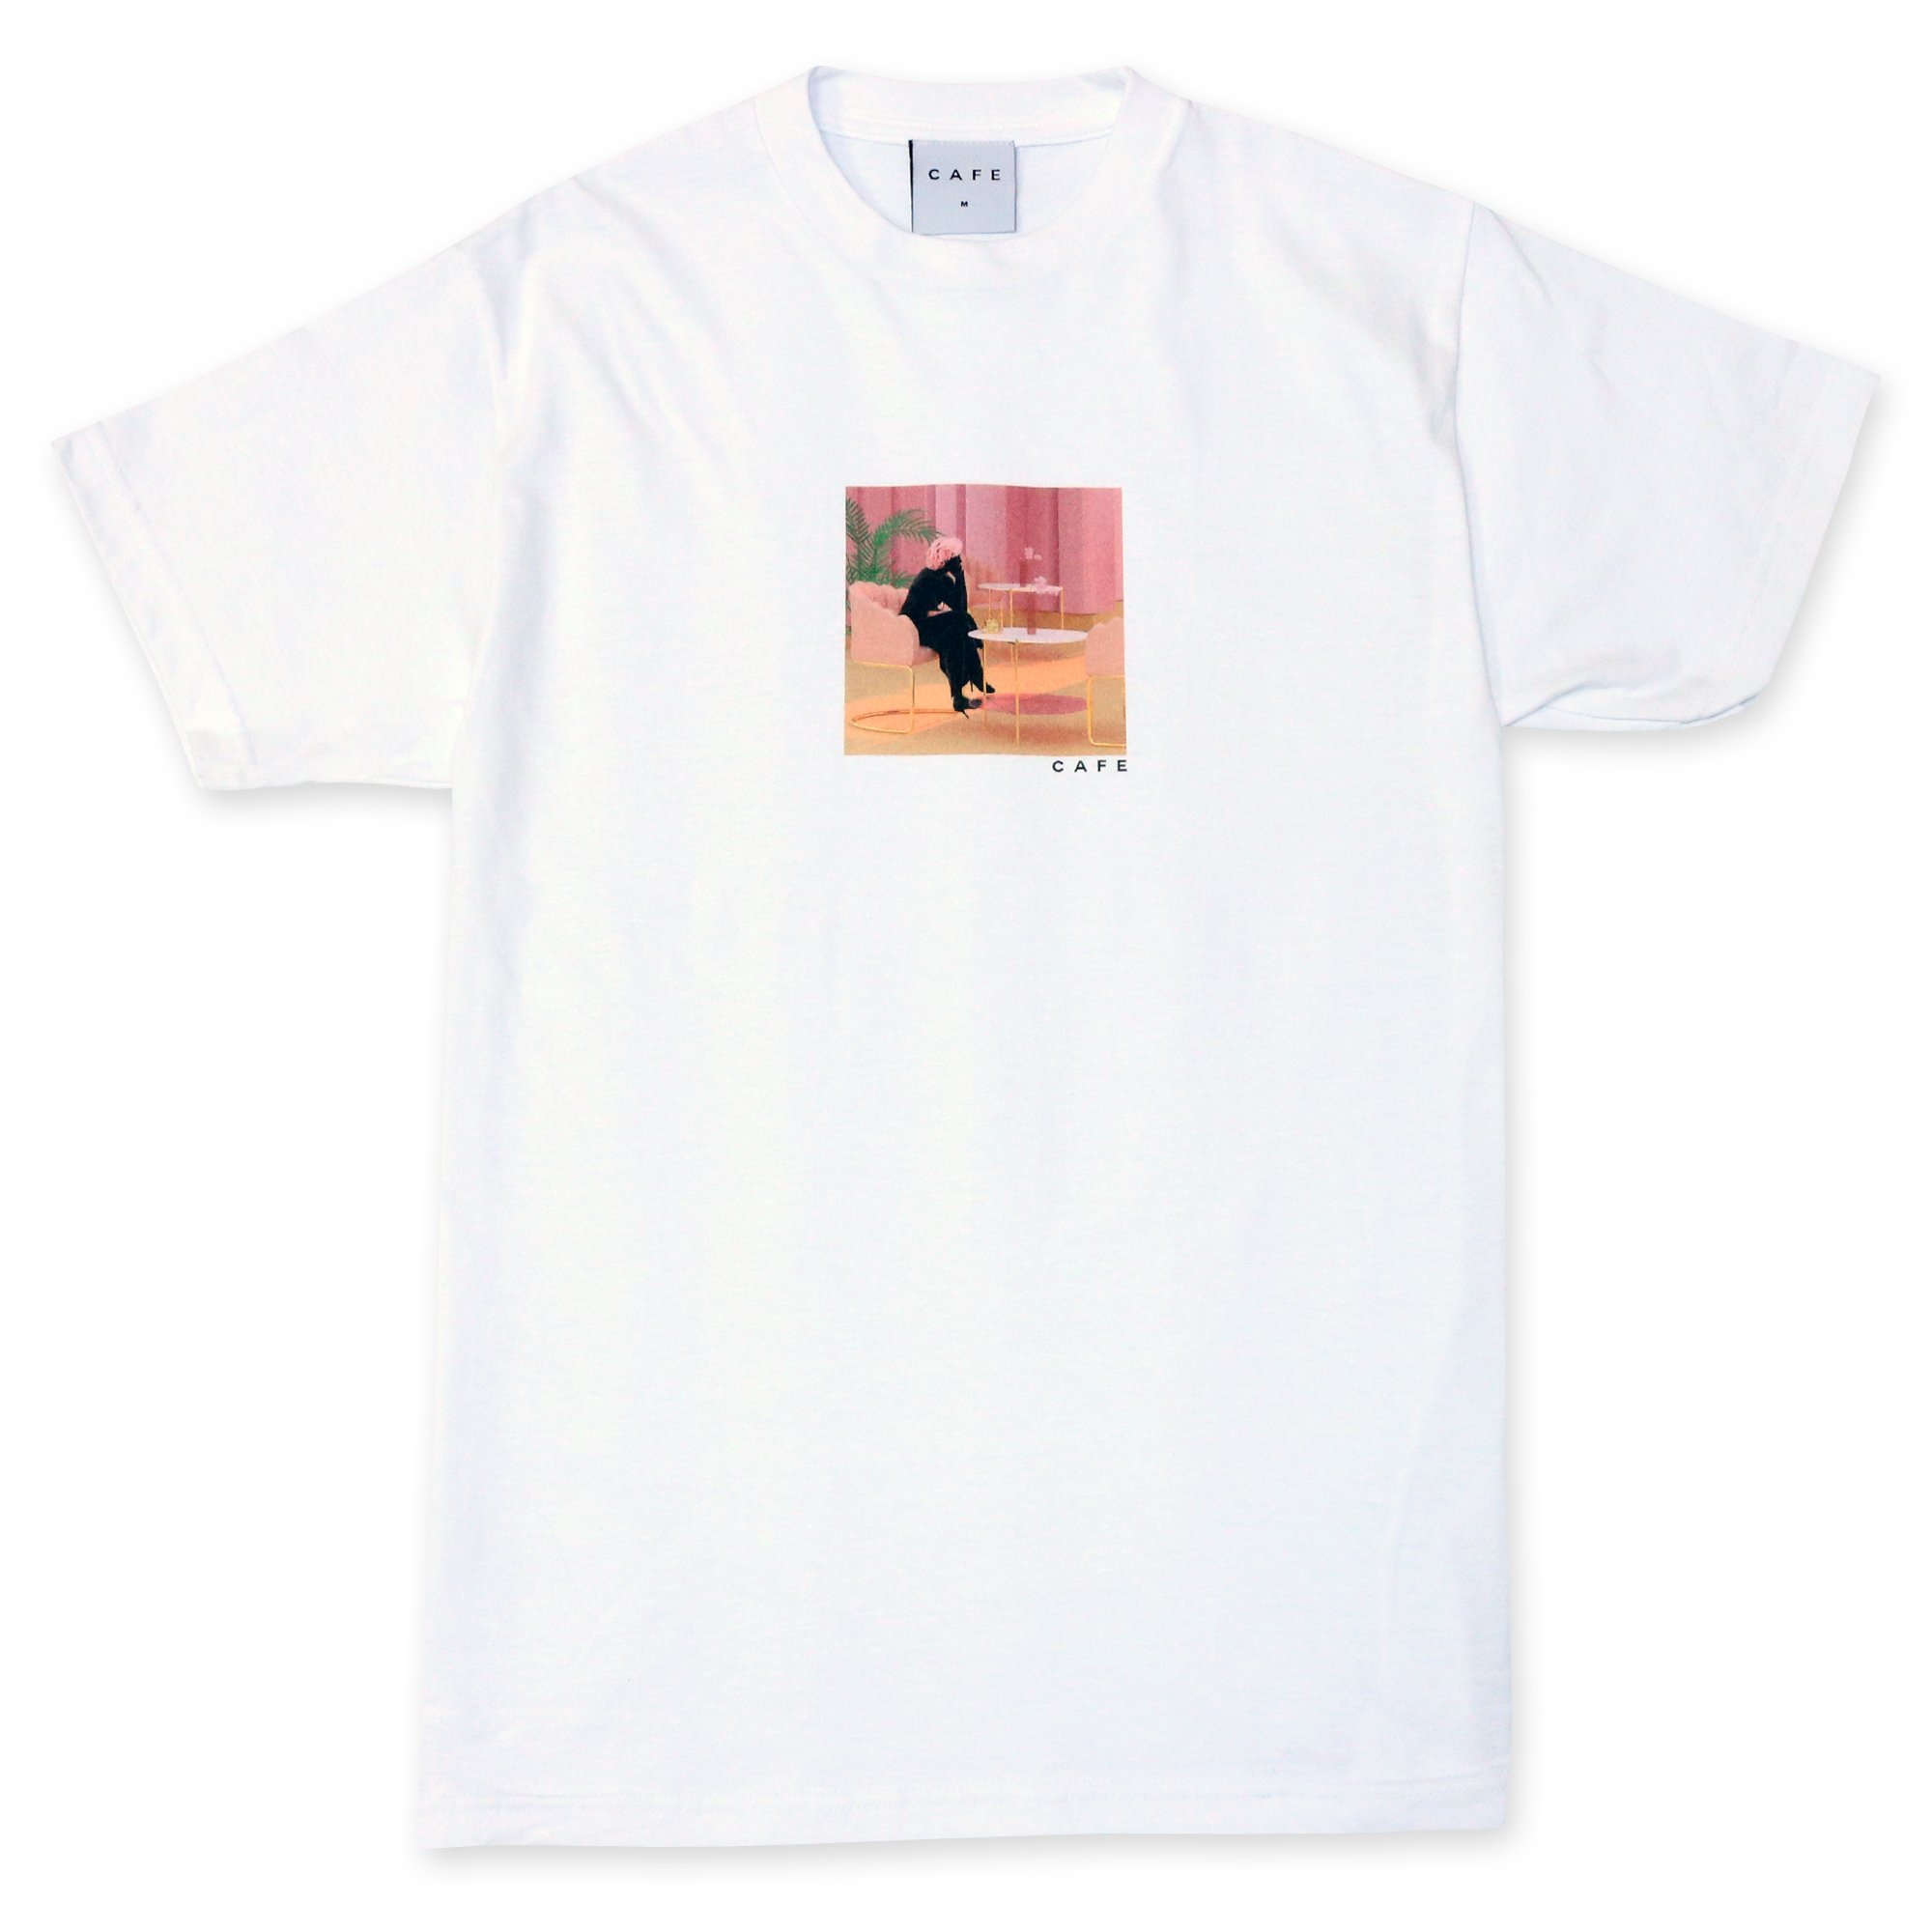 Skateboard Cafe Unexpected Beauty Tee - White 